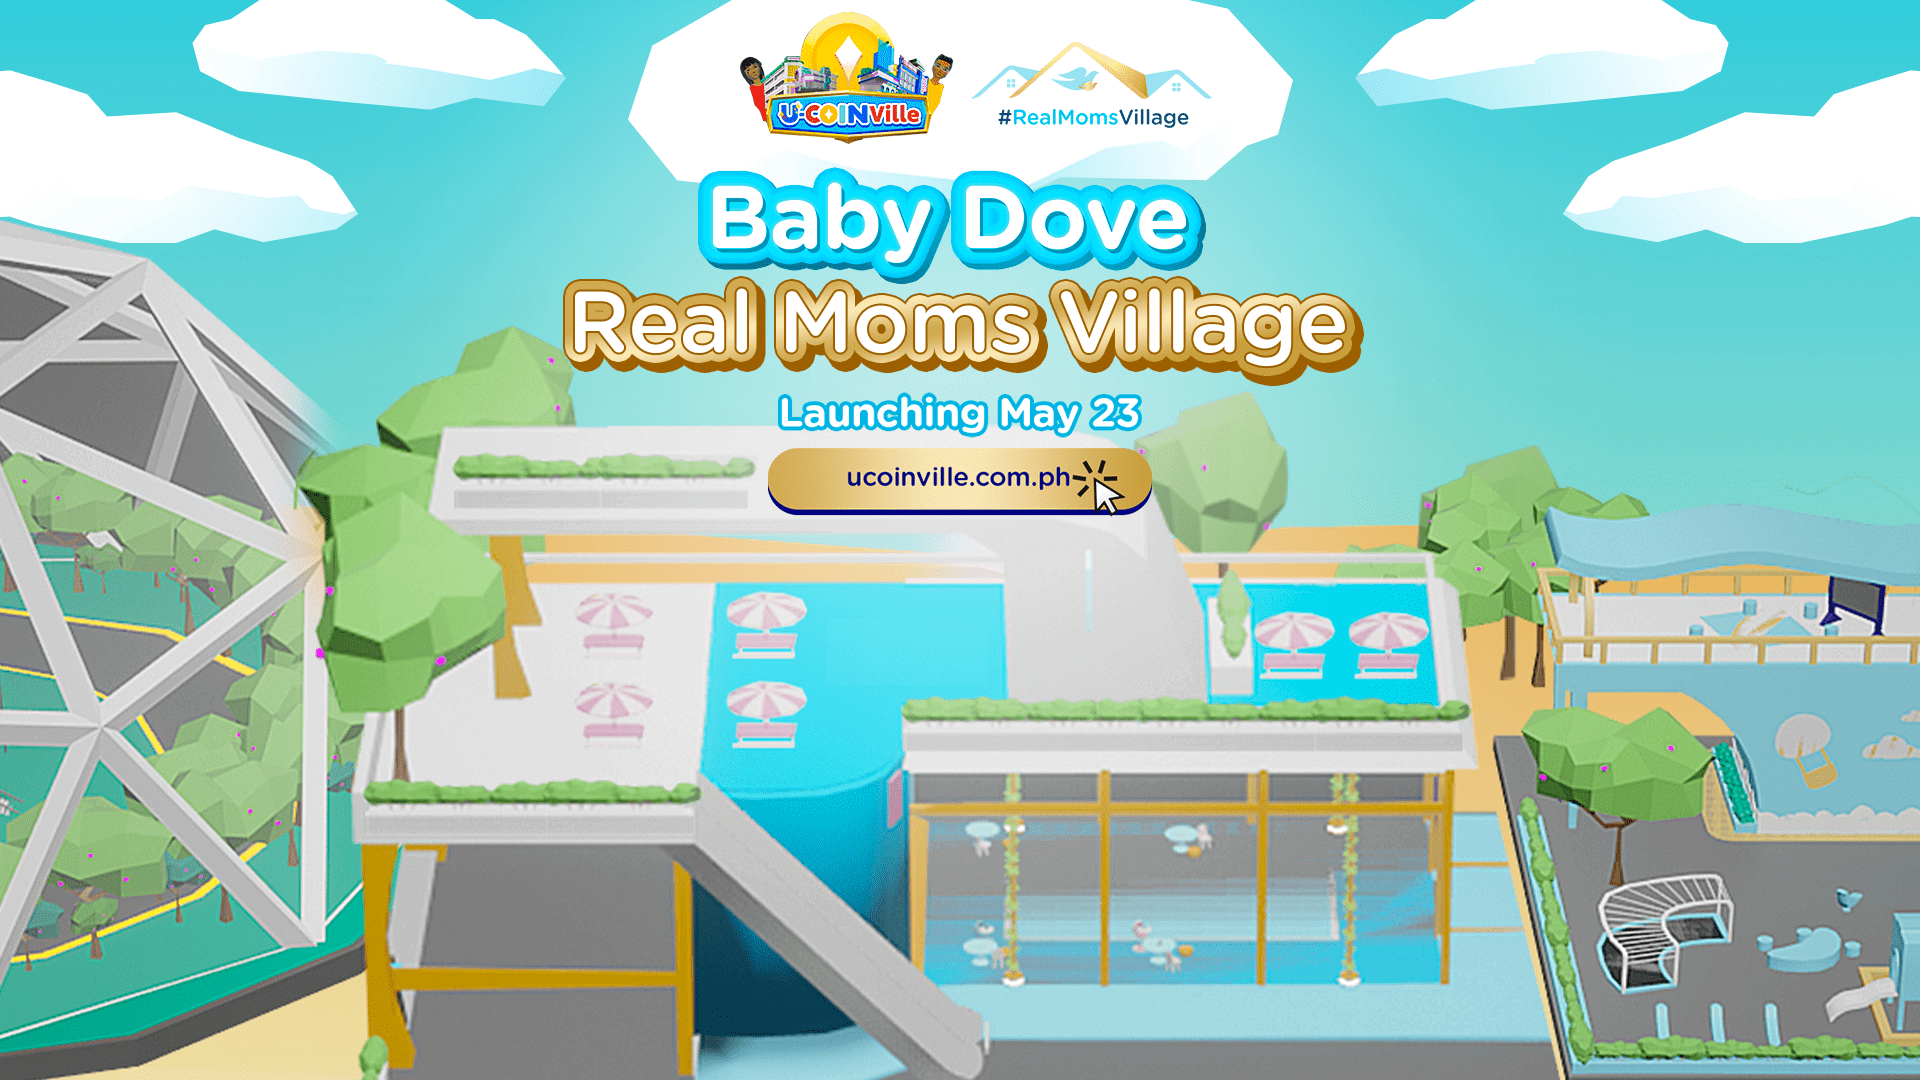 Moms in the Metaverse Unilever pioneers an all new mommy community experience through Baby Doves RealMomsVillage